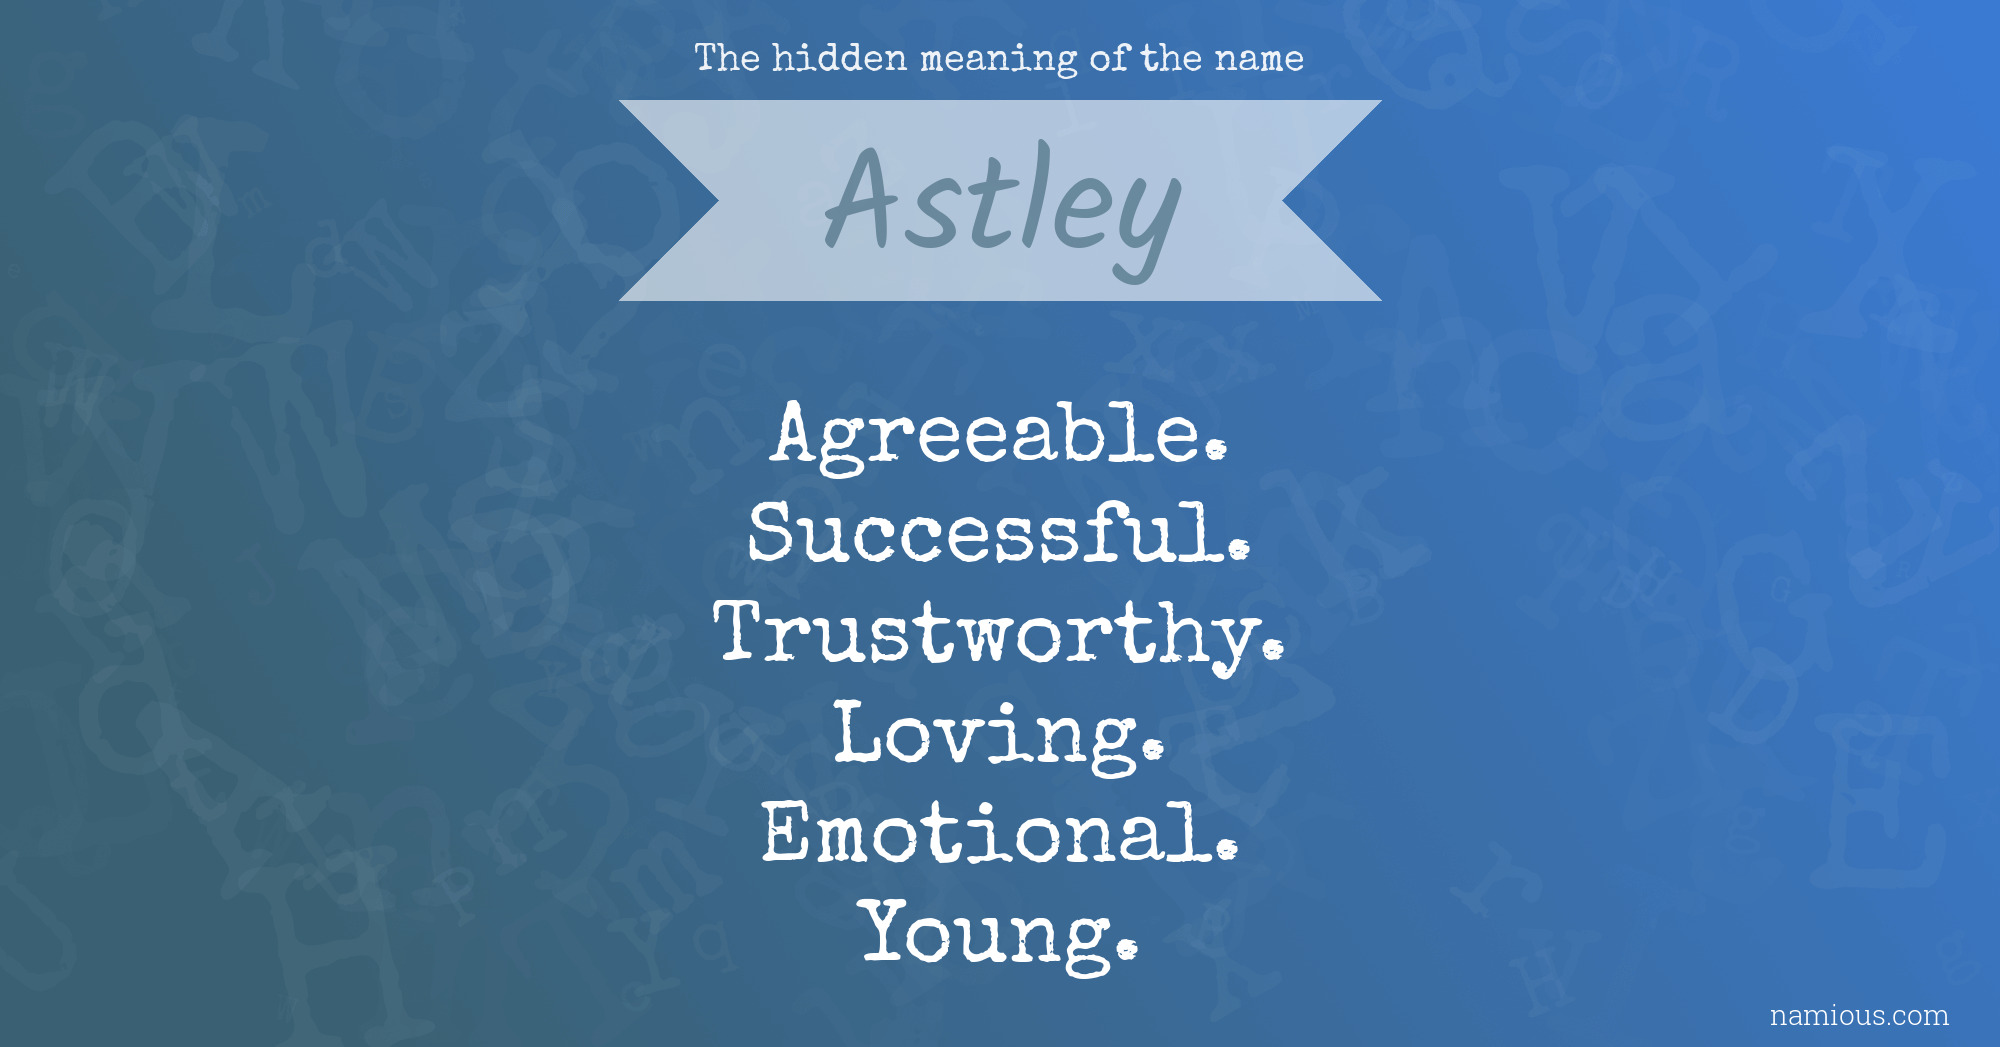 The hidden meaning of the name Astley